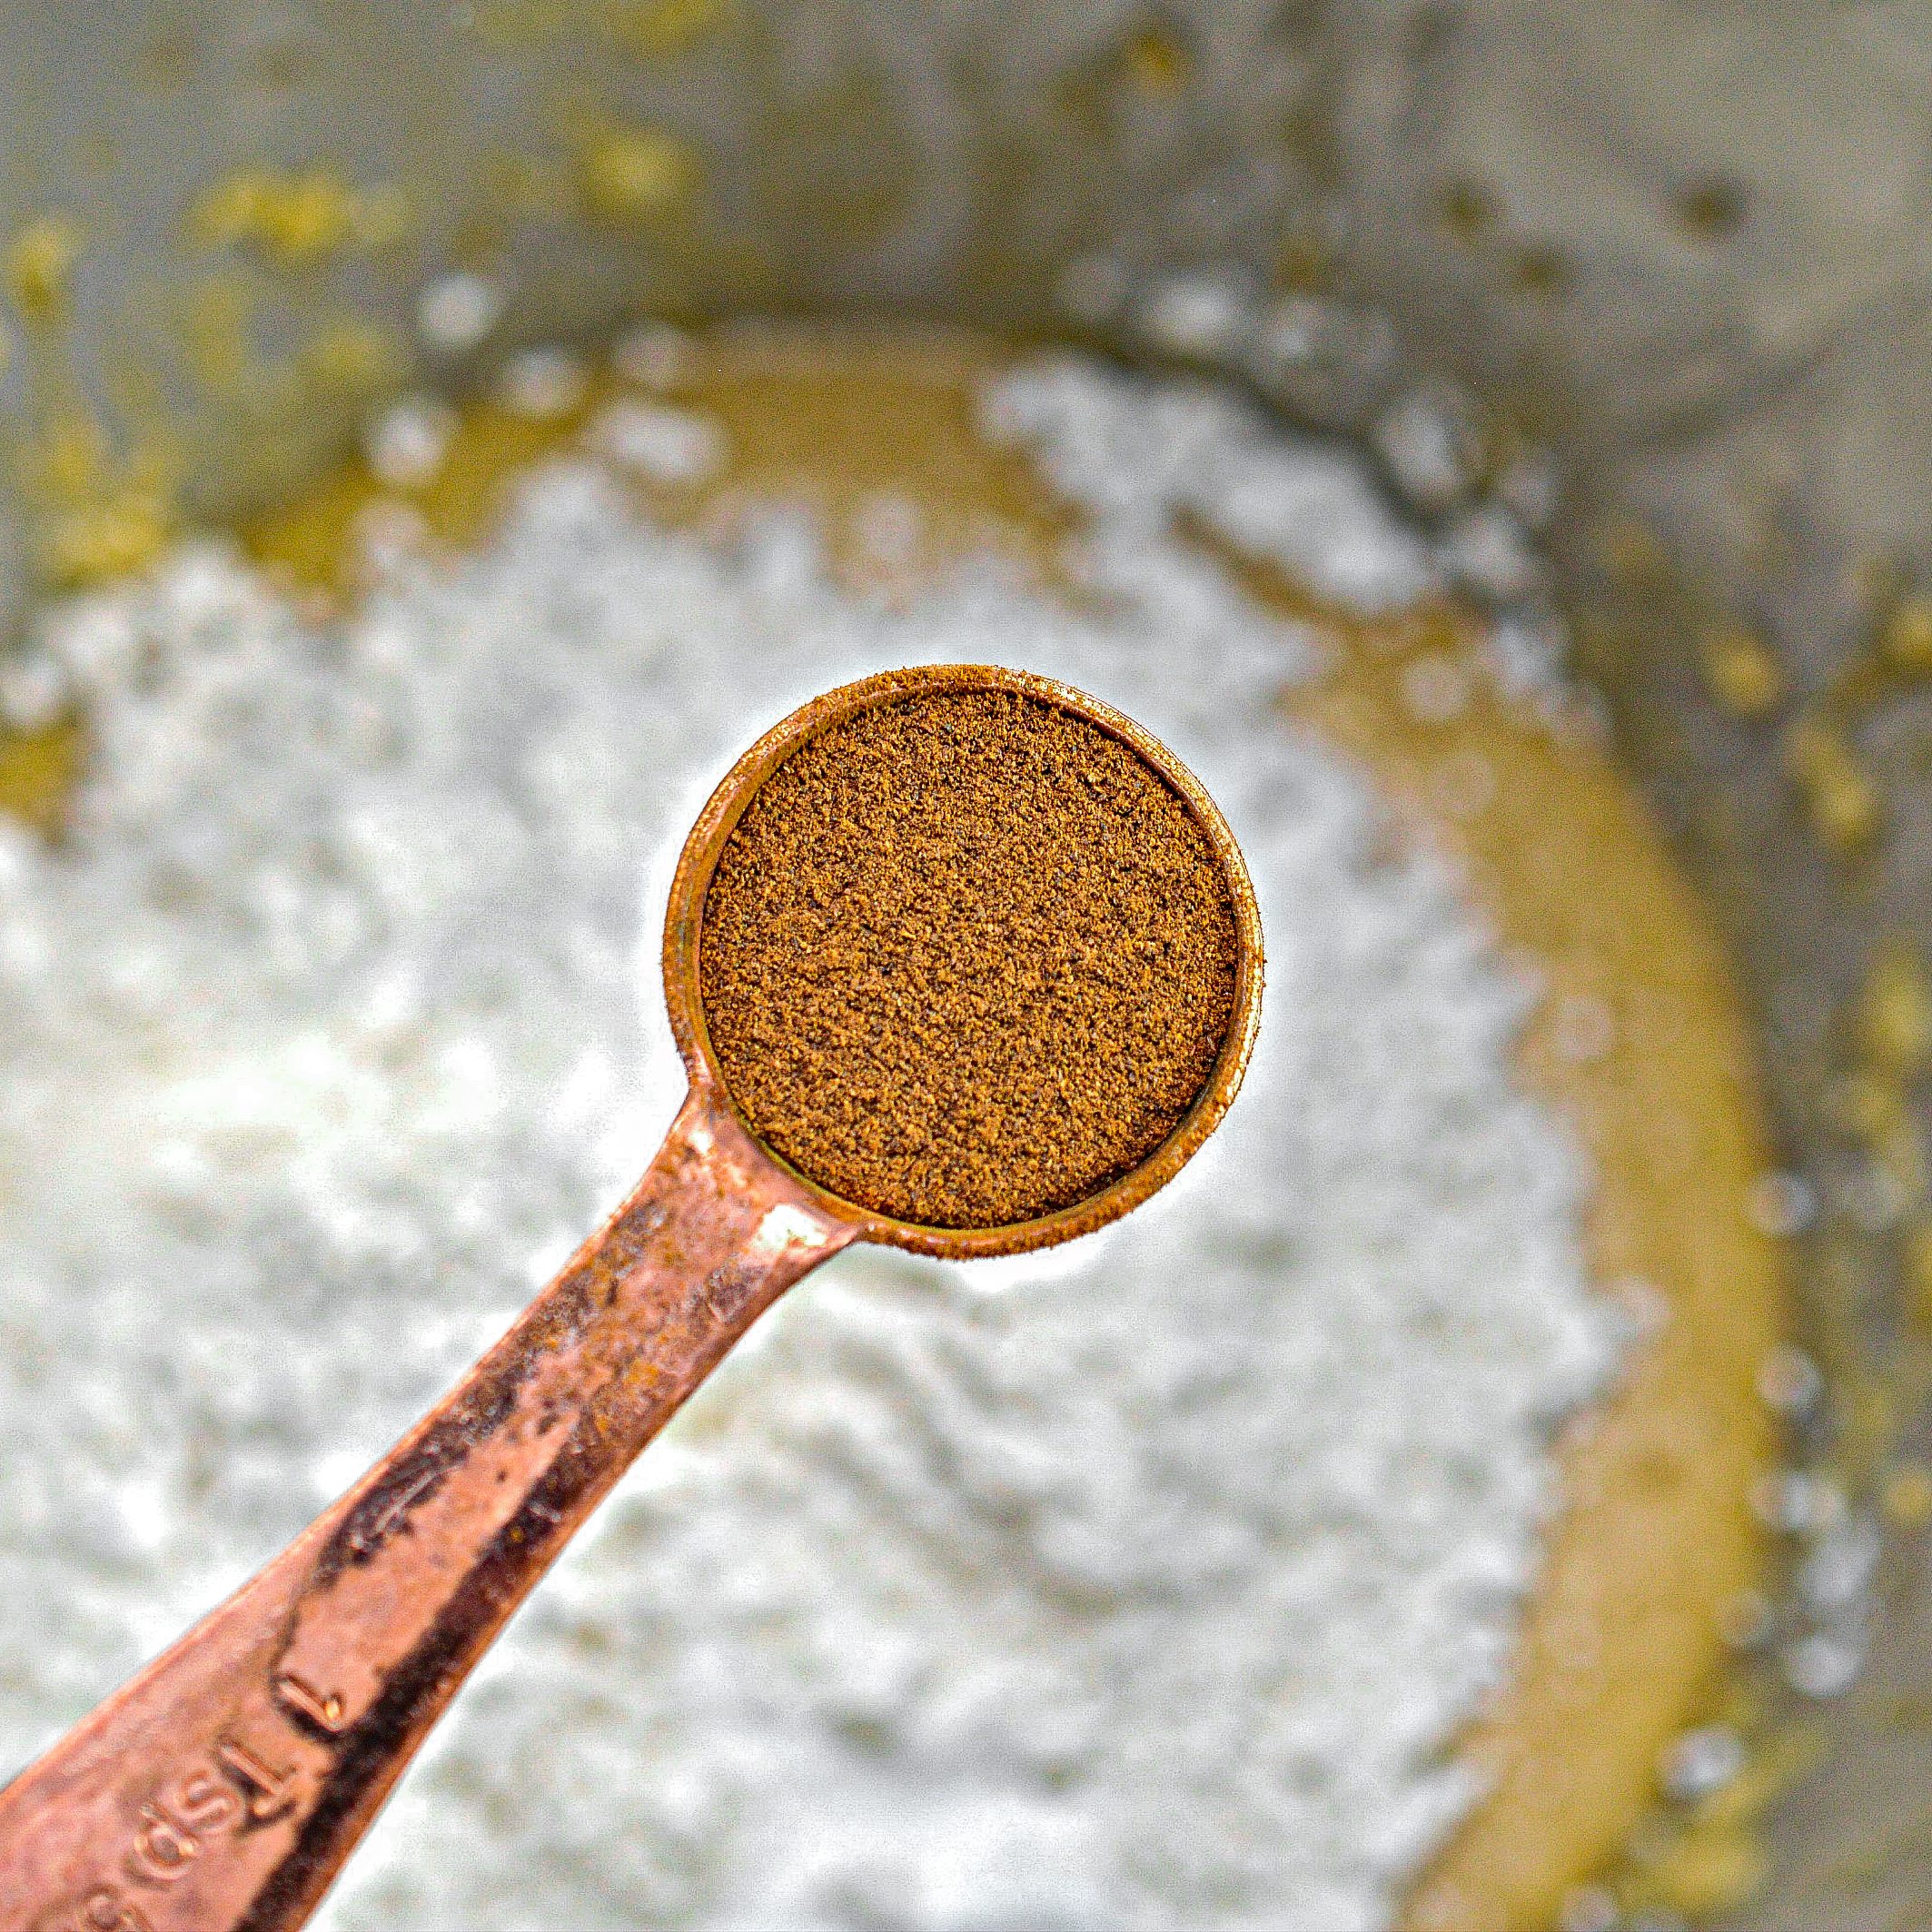 Mix in the flour, oats, baking soda, cinnamon, and nutmeg until well incorporated.